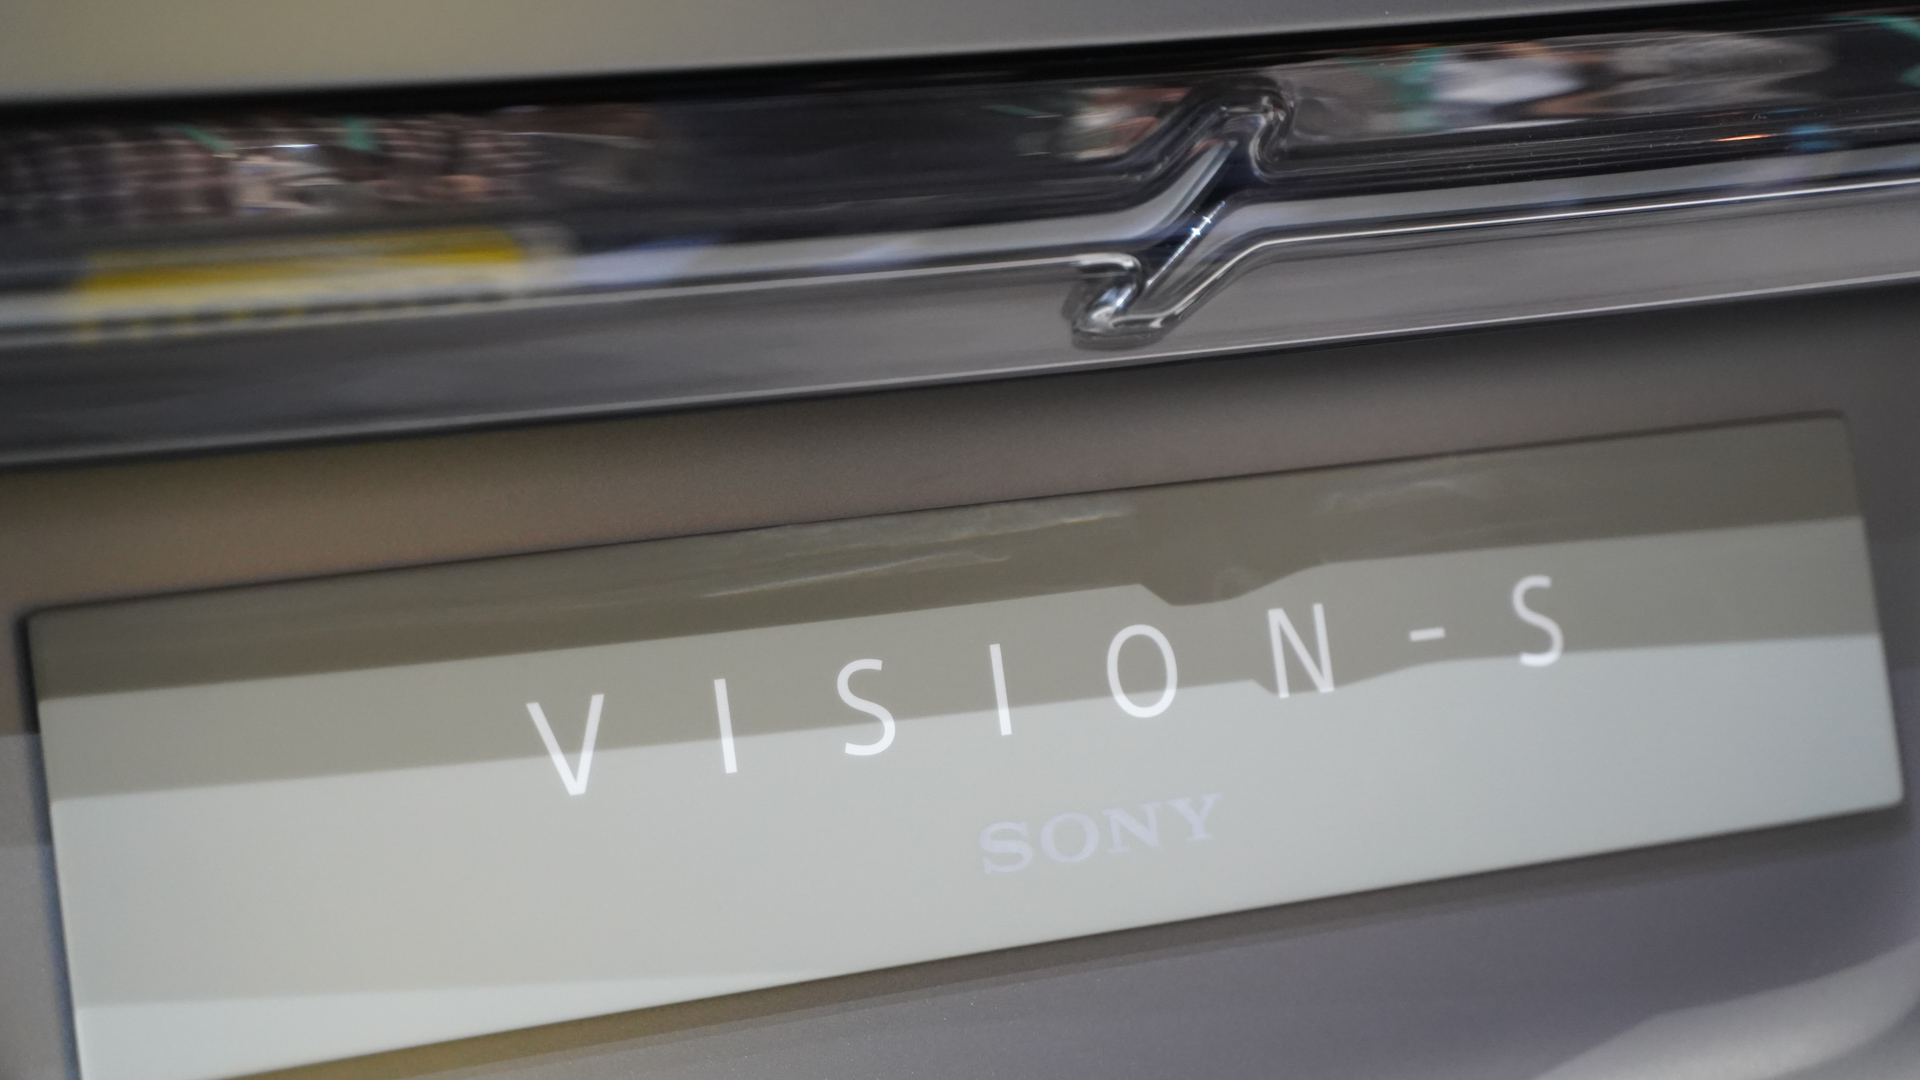 Sony Vision S rear ornament